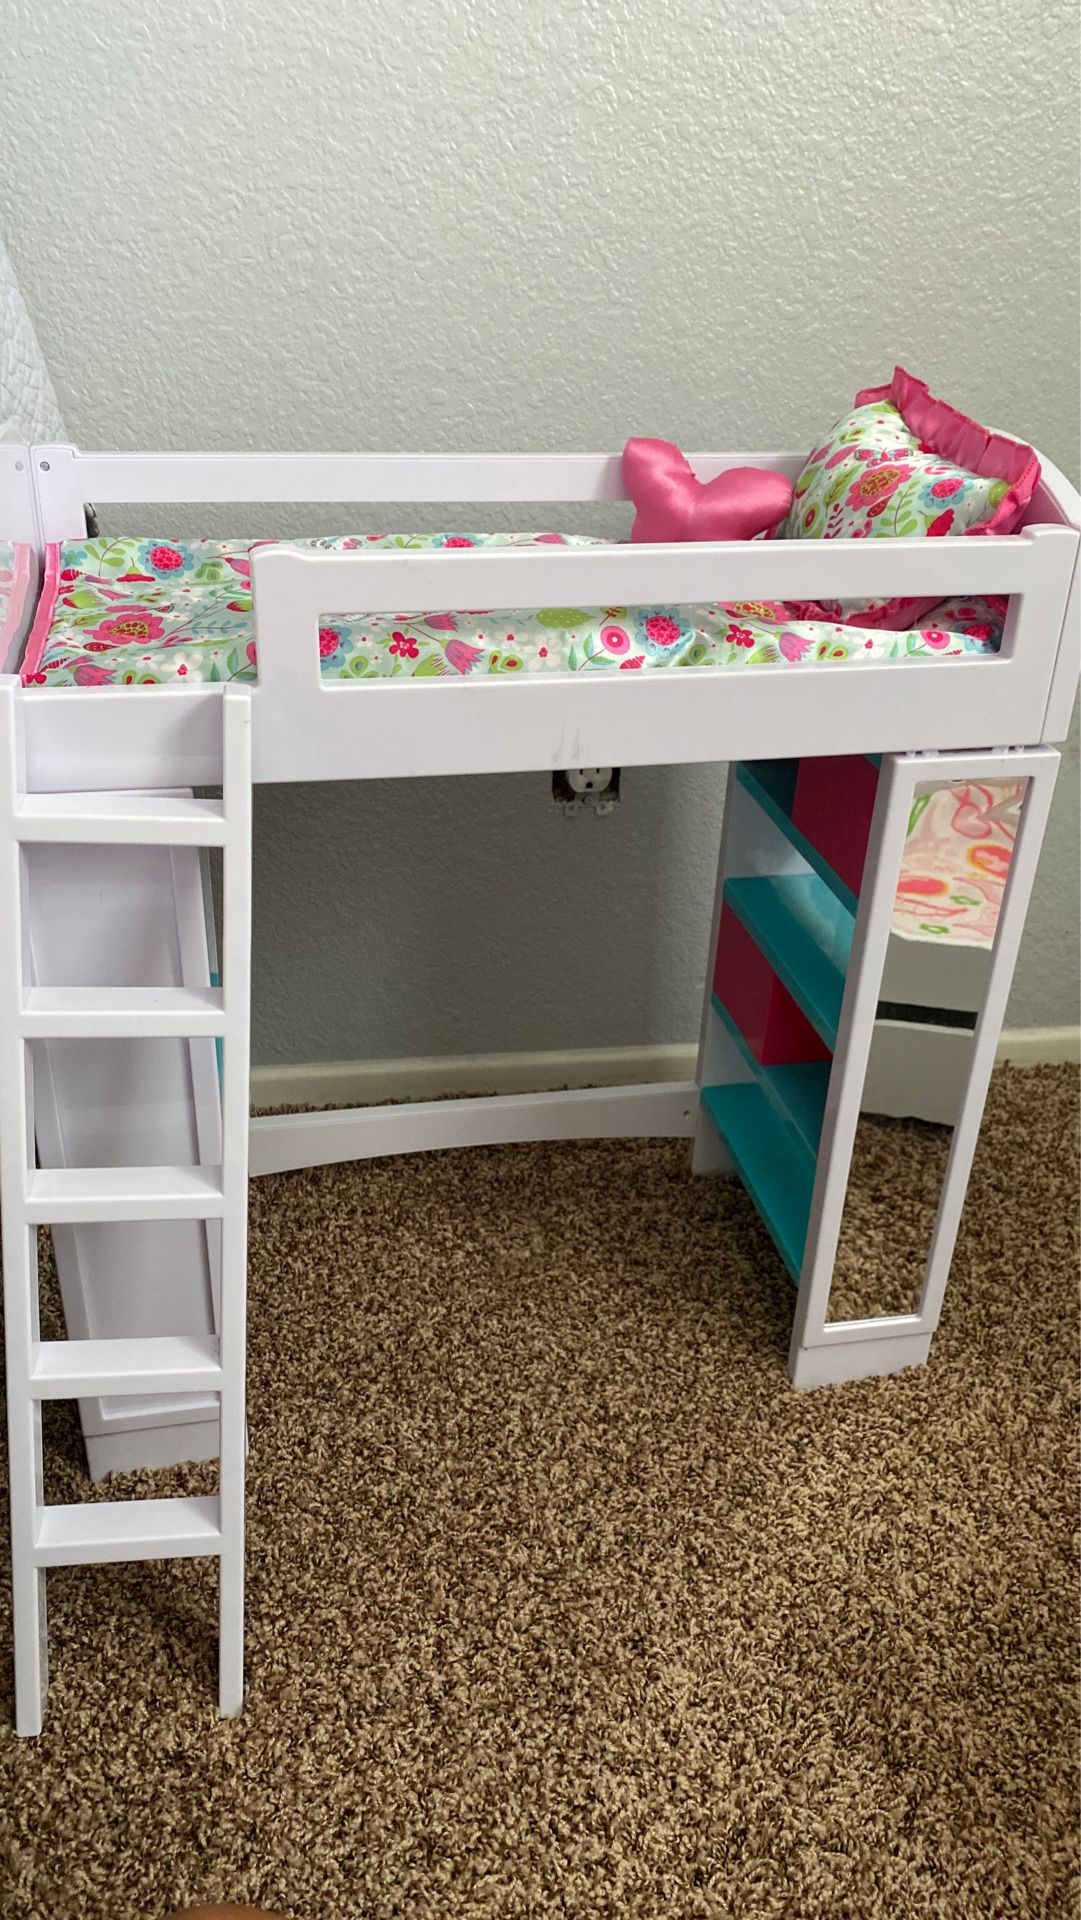 Doll bed and storage